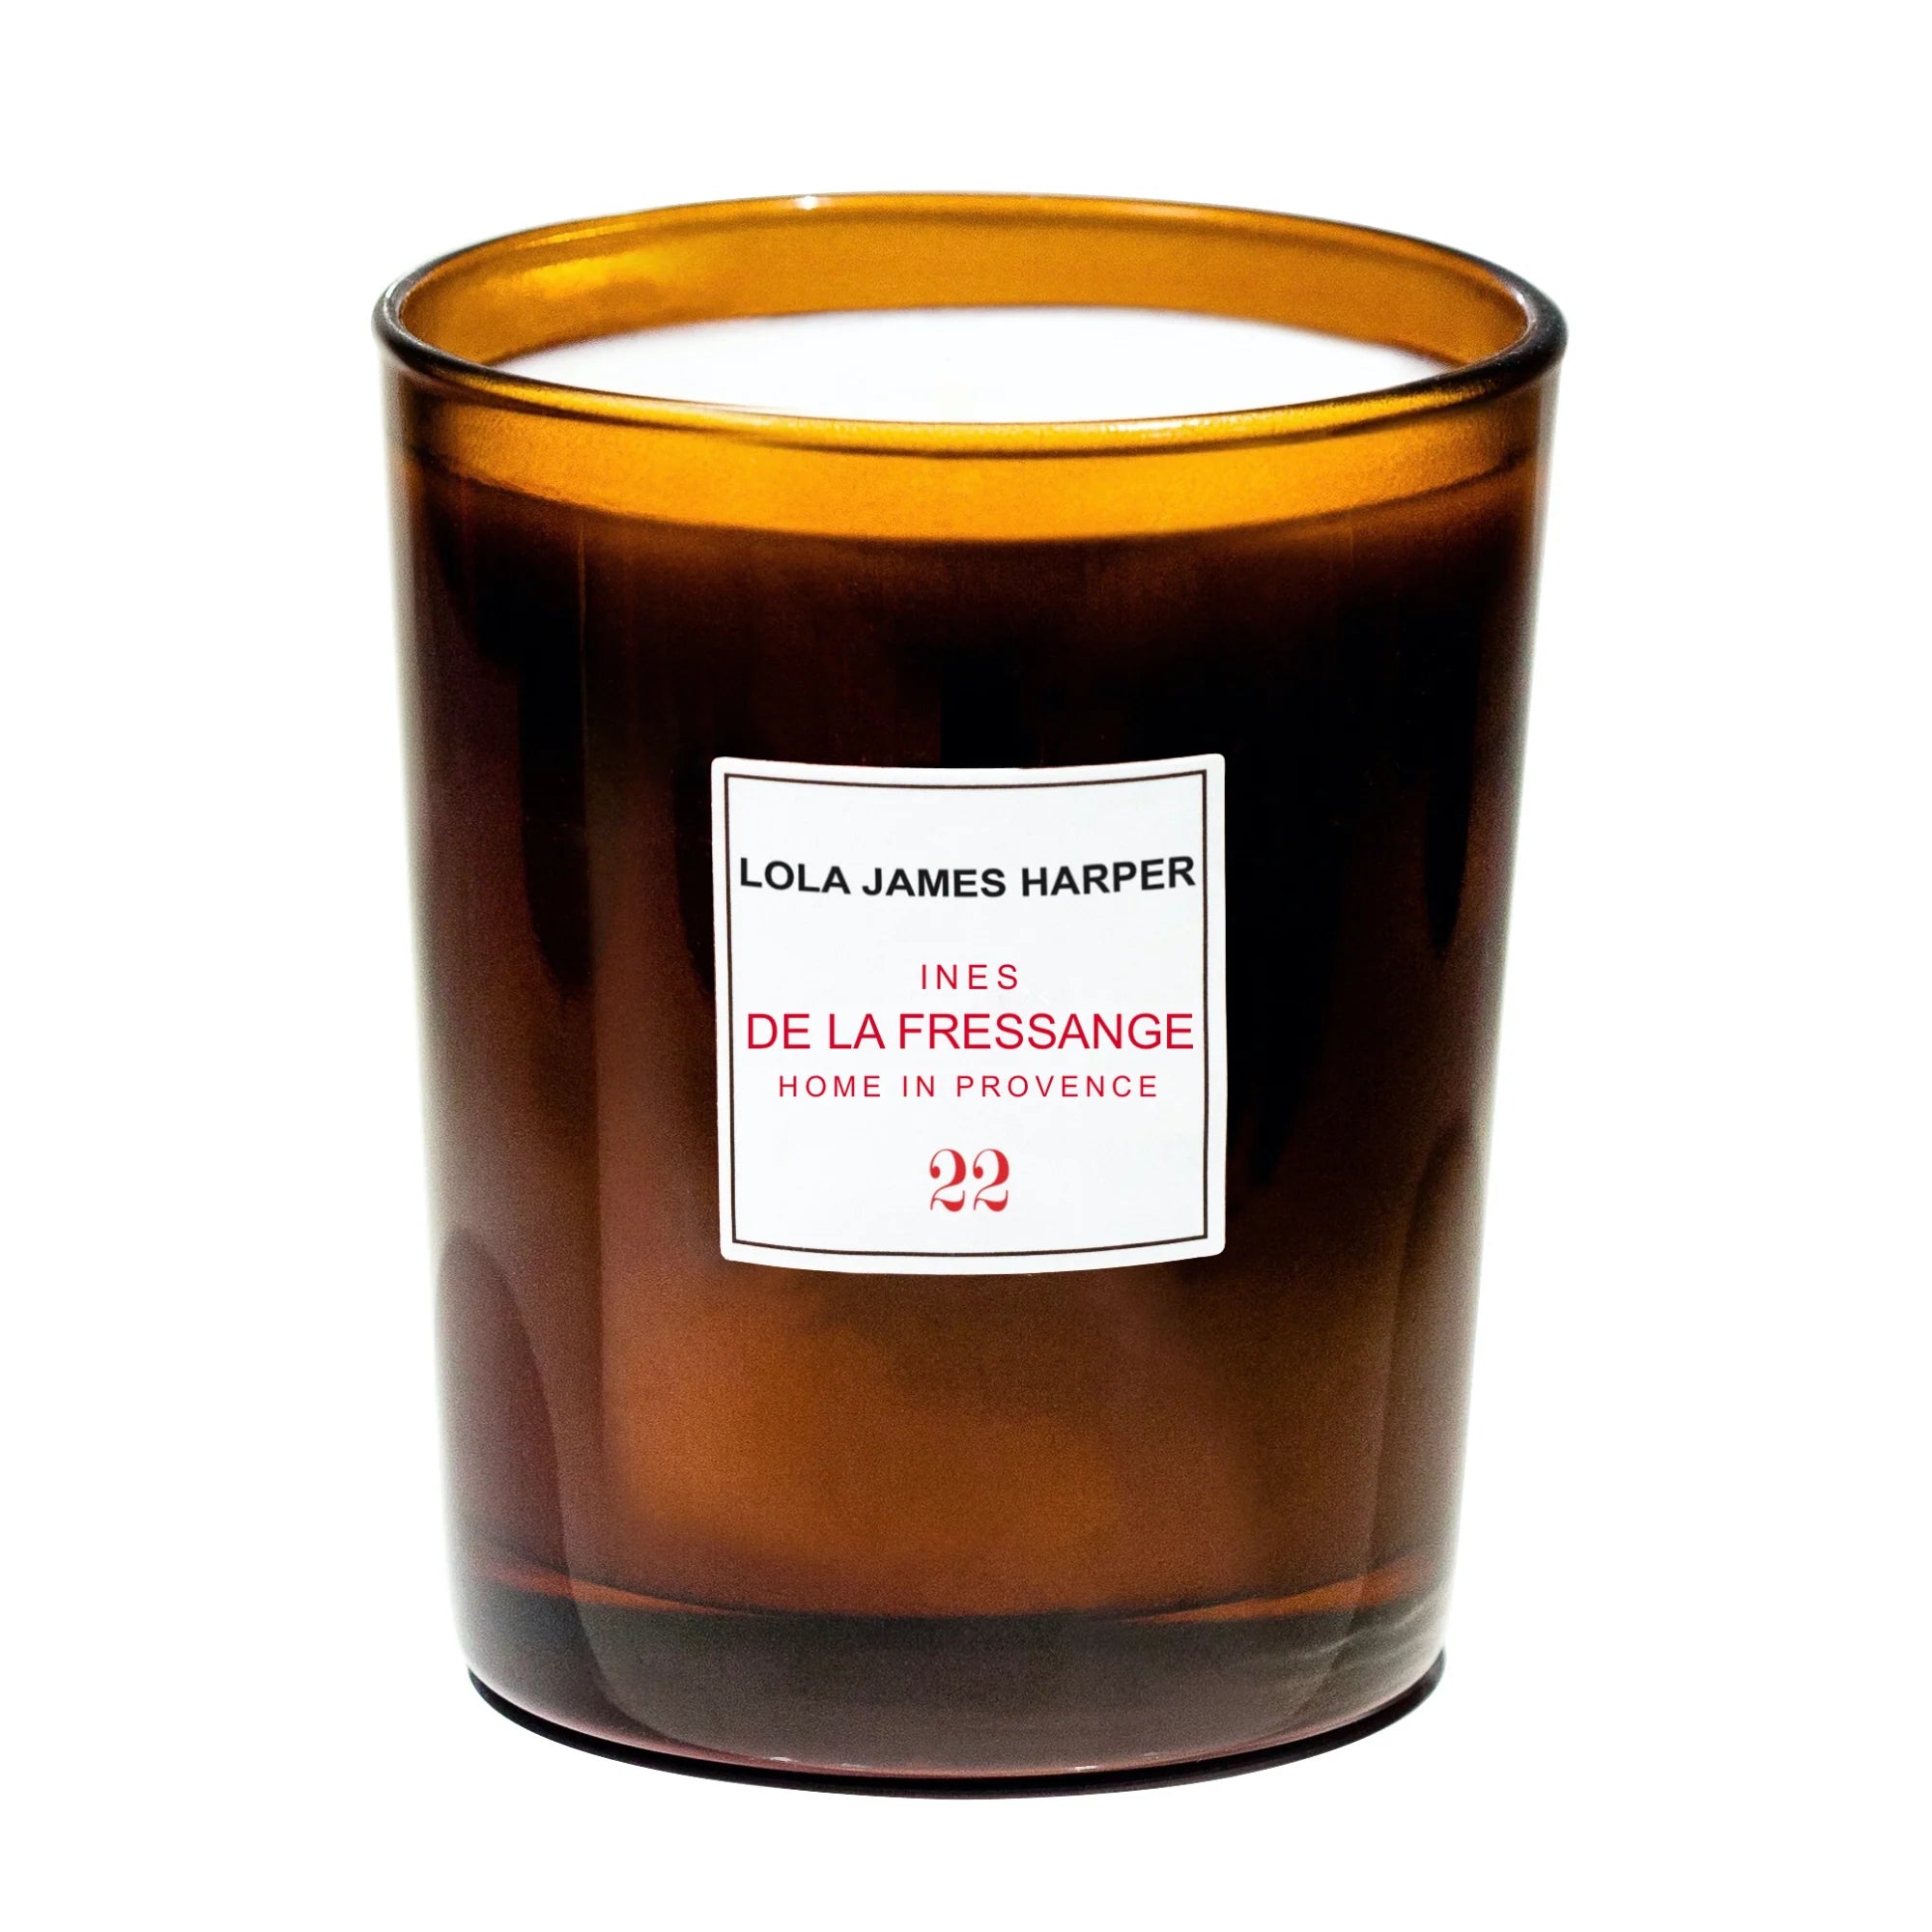 22 The Ines de la Fressange Home in Provence - Cande 190G - by Lola James Harper